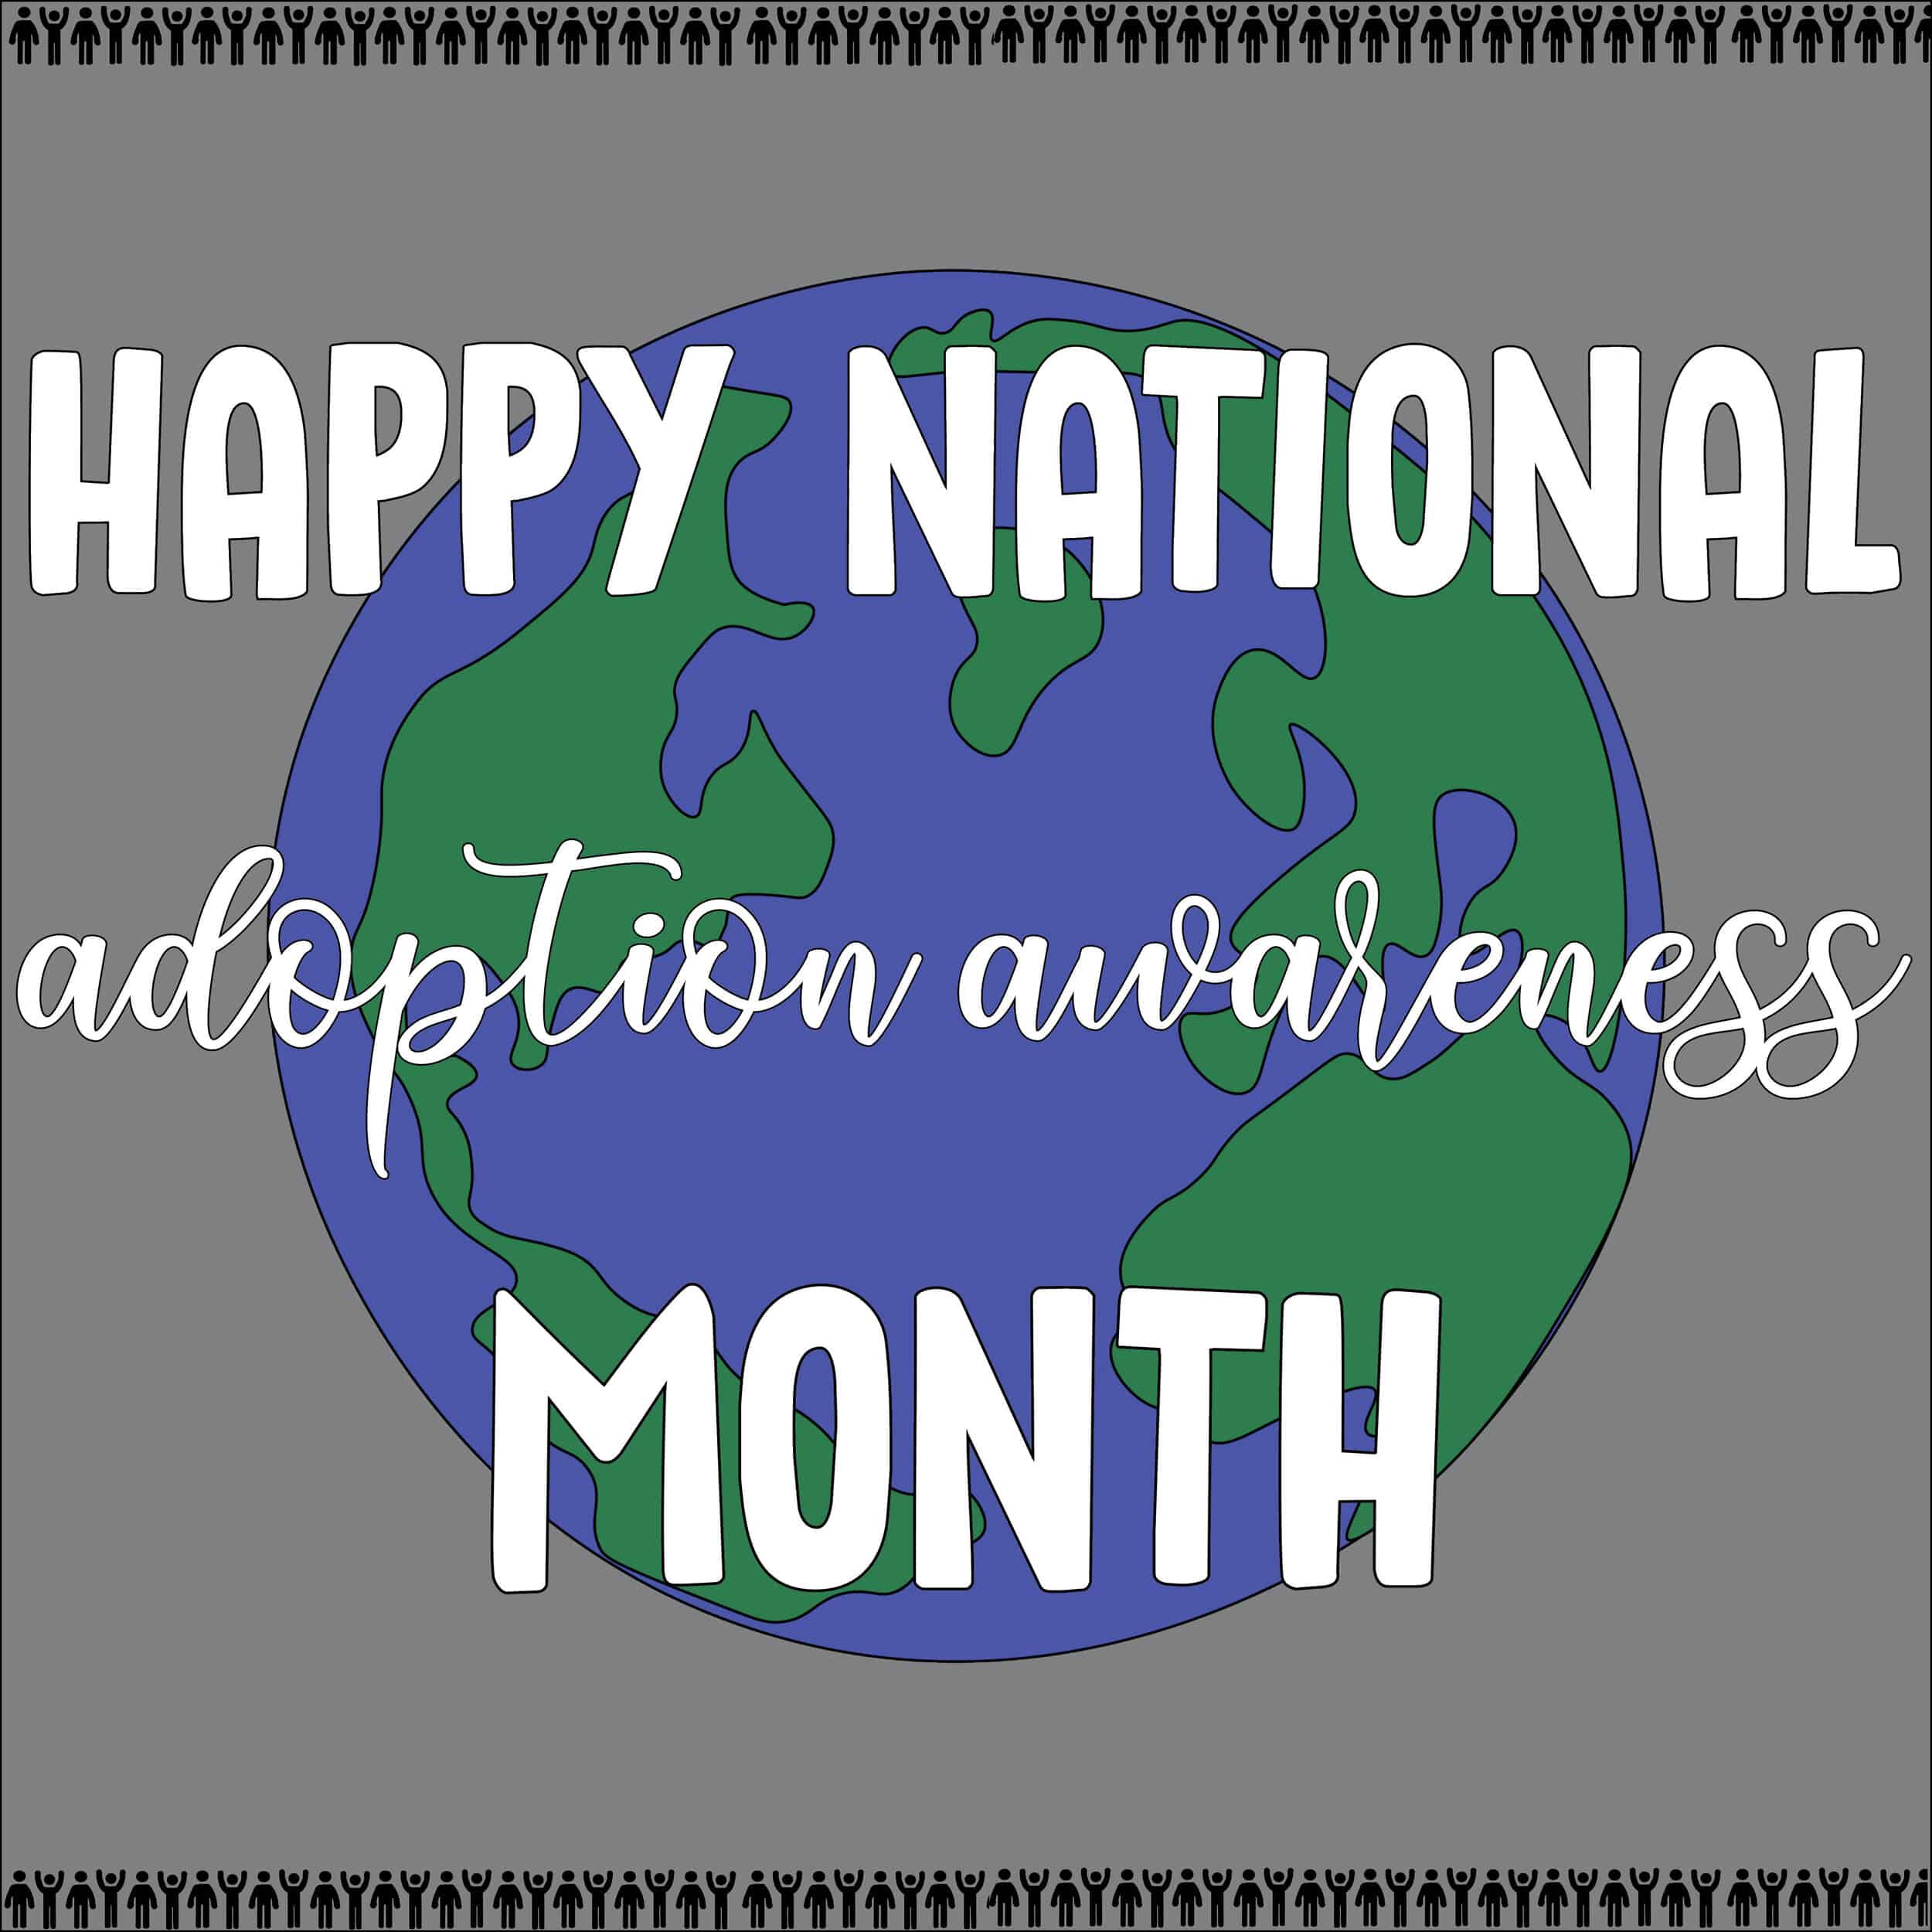 During the month of November, we acknowledge National Adoption Awareness Month. According to The Adoption Network, 135,000 children are adopted in the United States every year. 428,000 children still await to be adopted in foster care in the United 